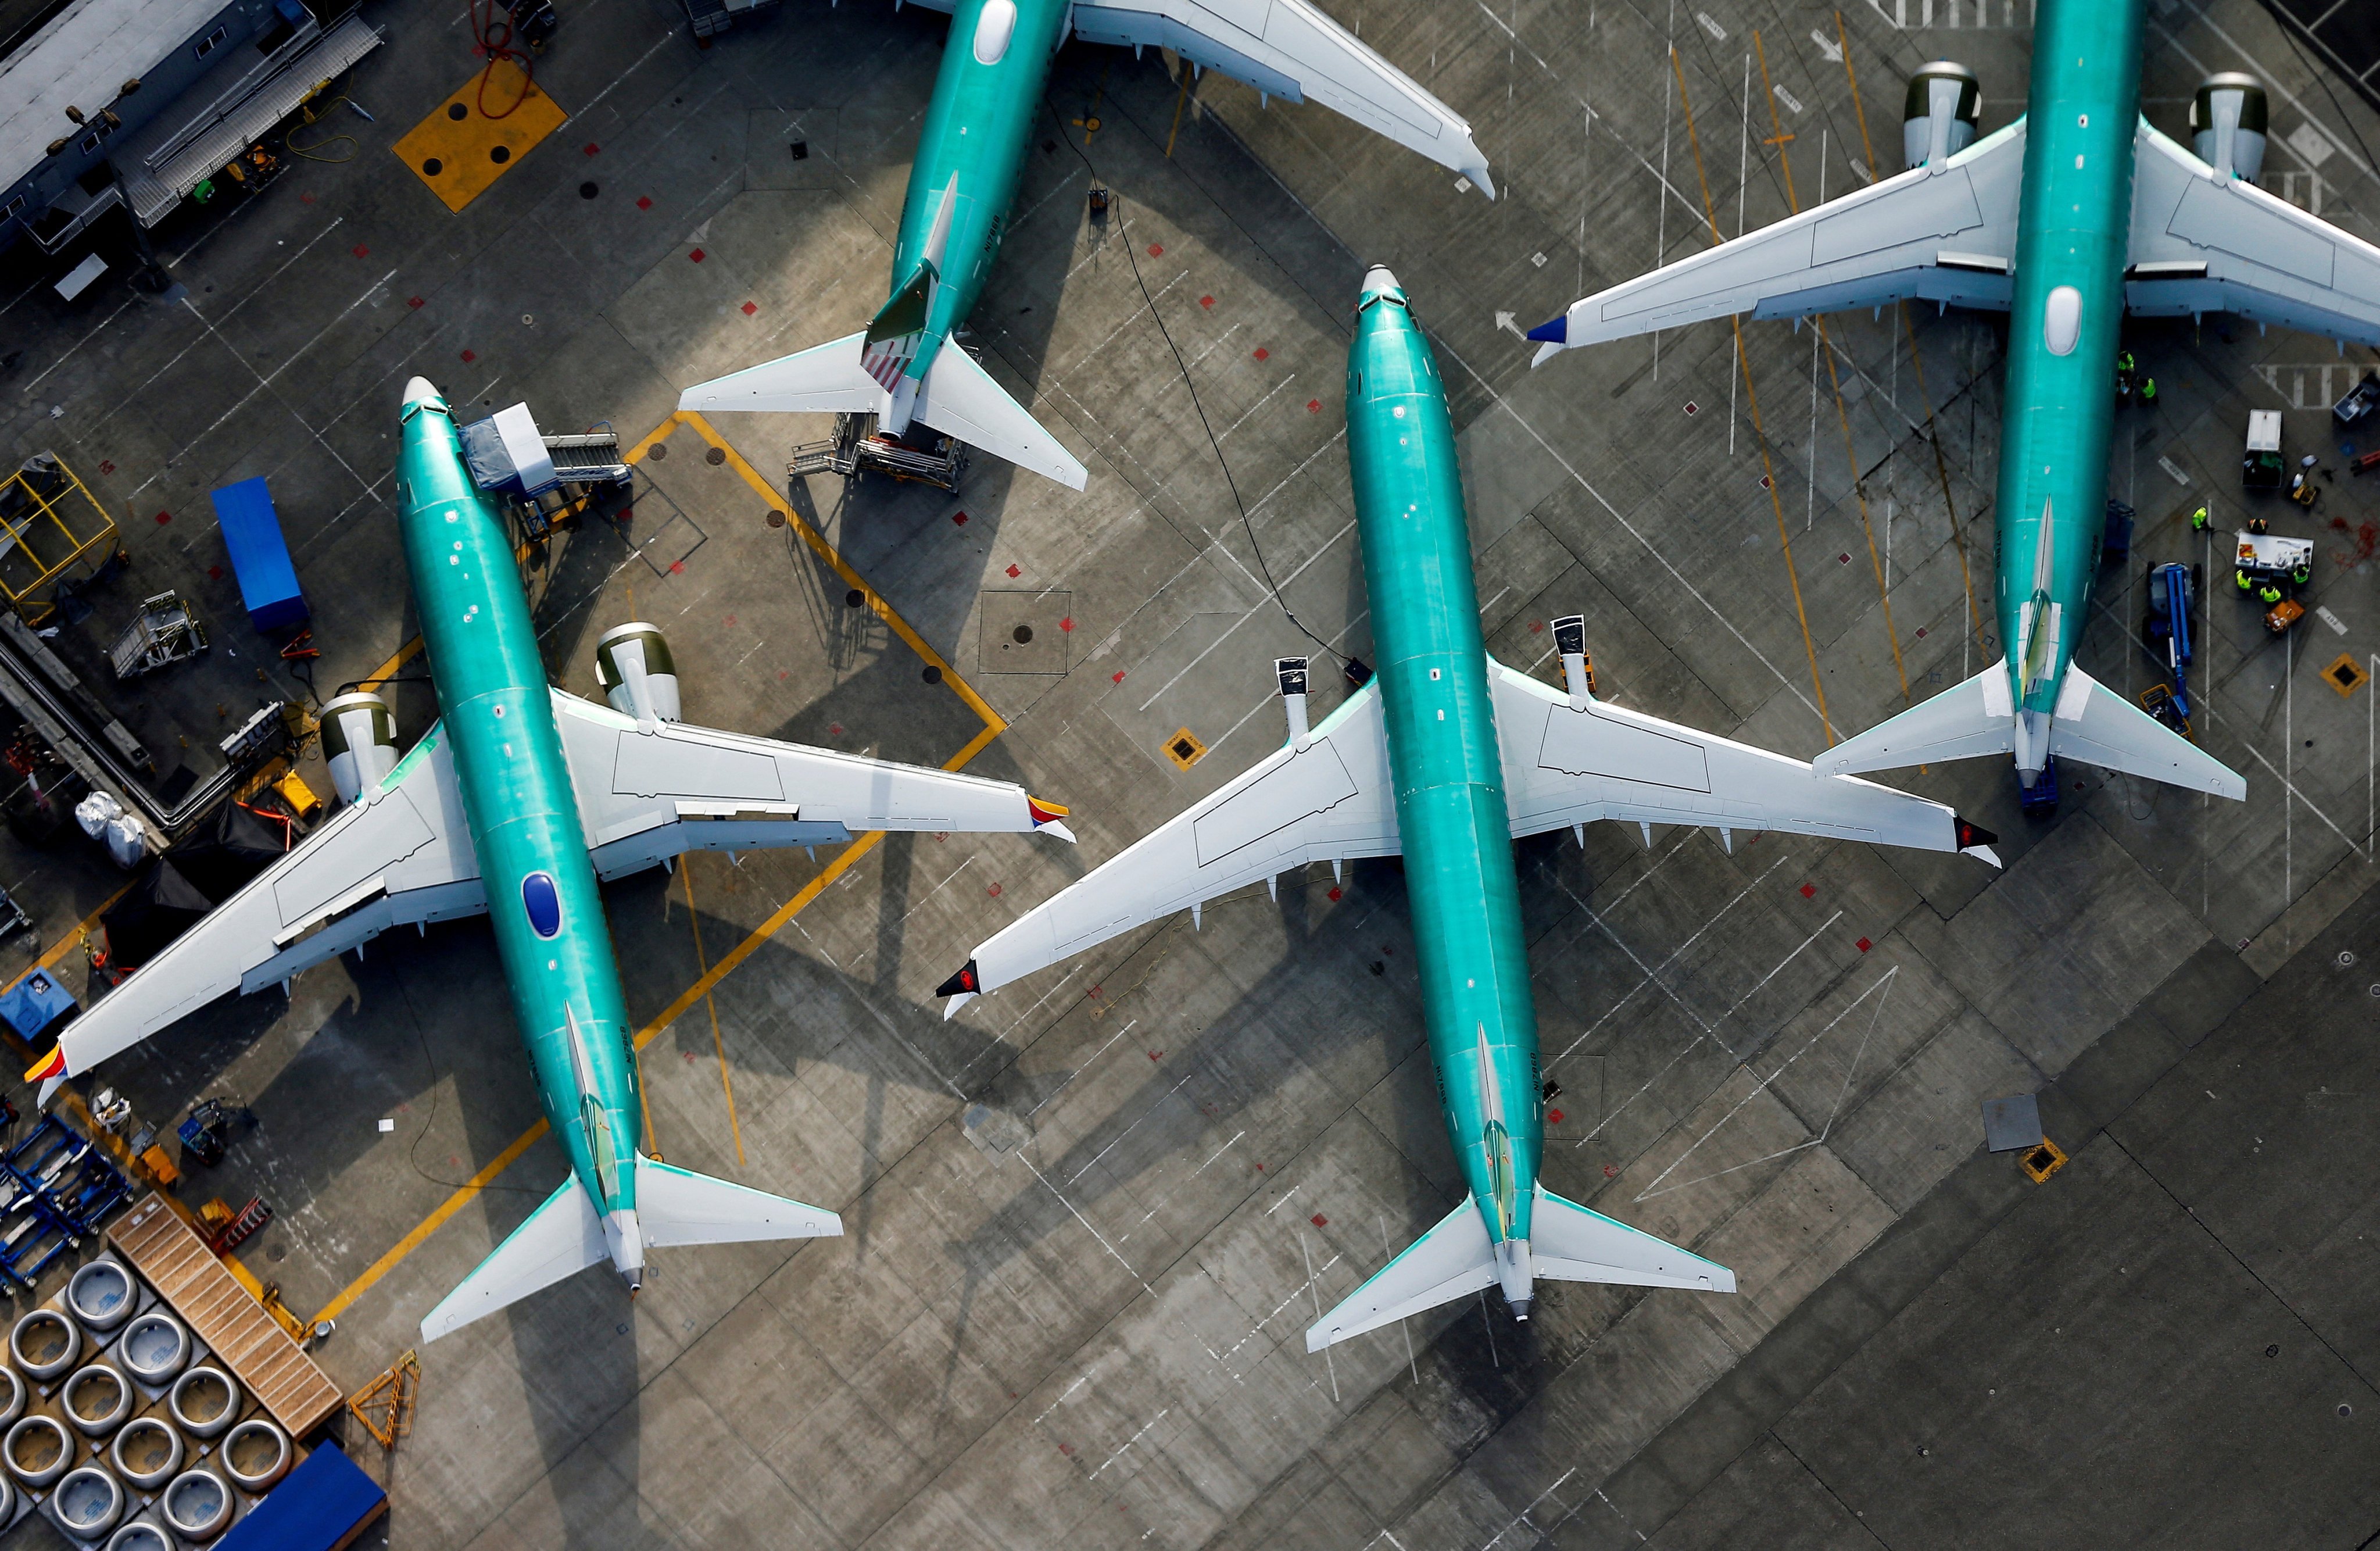 Boeing 737 Max planes are parked on the tarmac at the company’s factory in Renton, Washington, in March 2019. Photo: Reuters